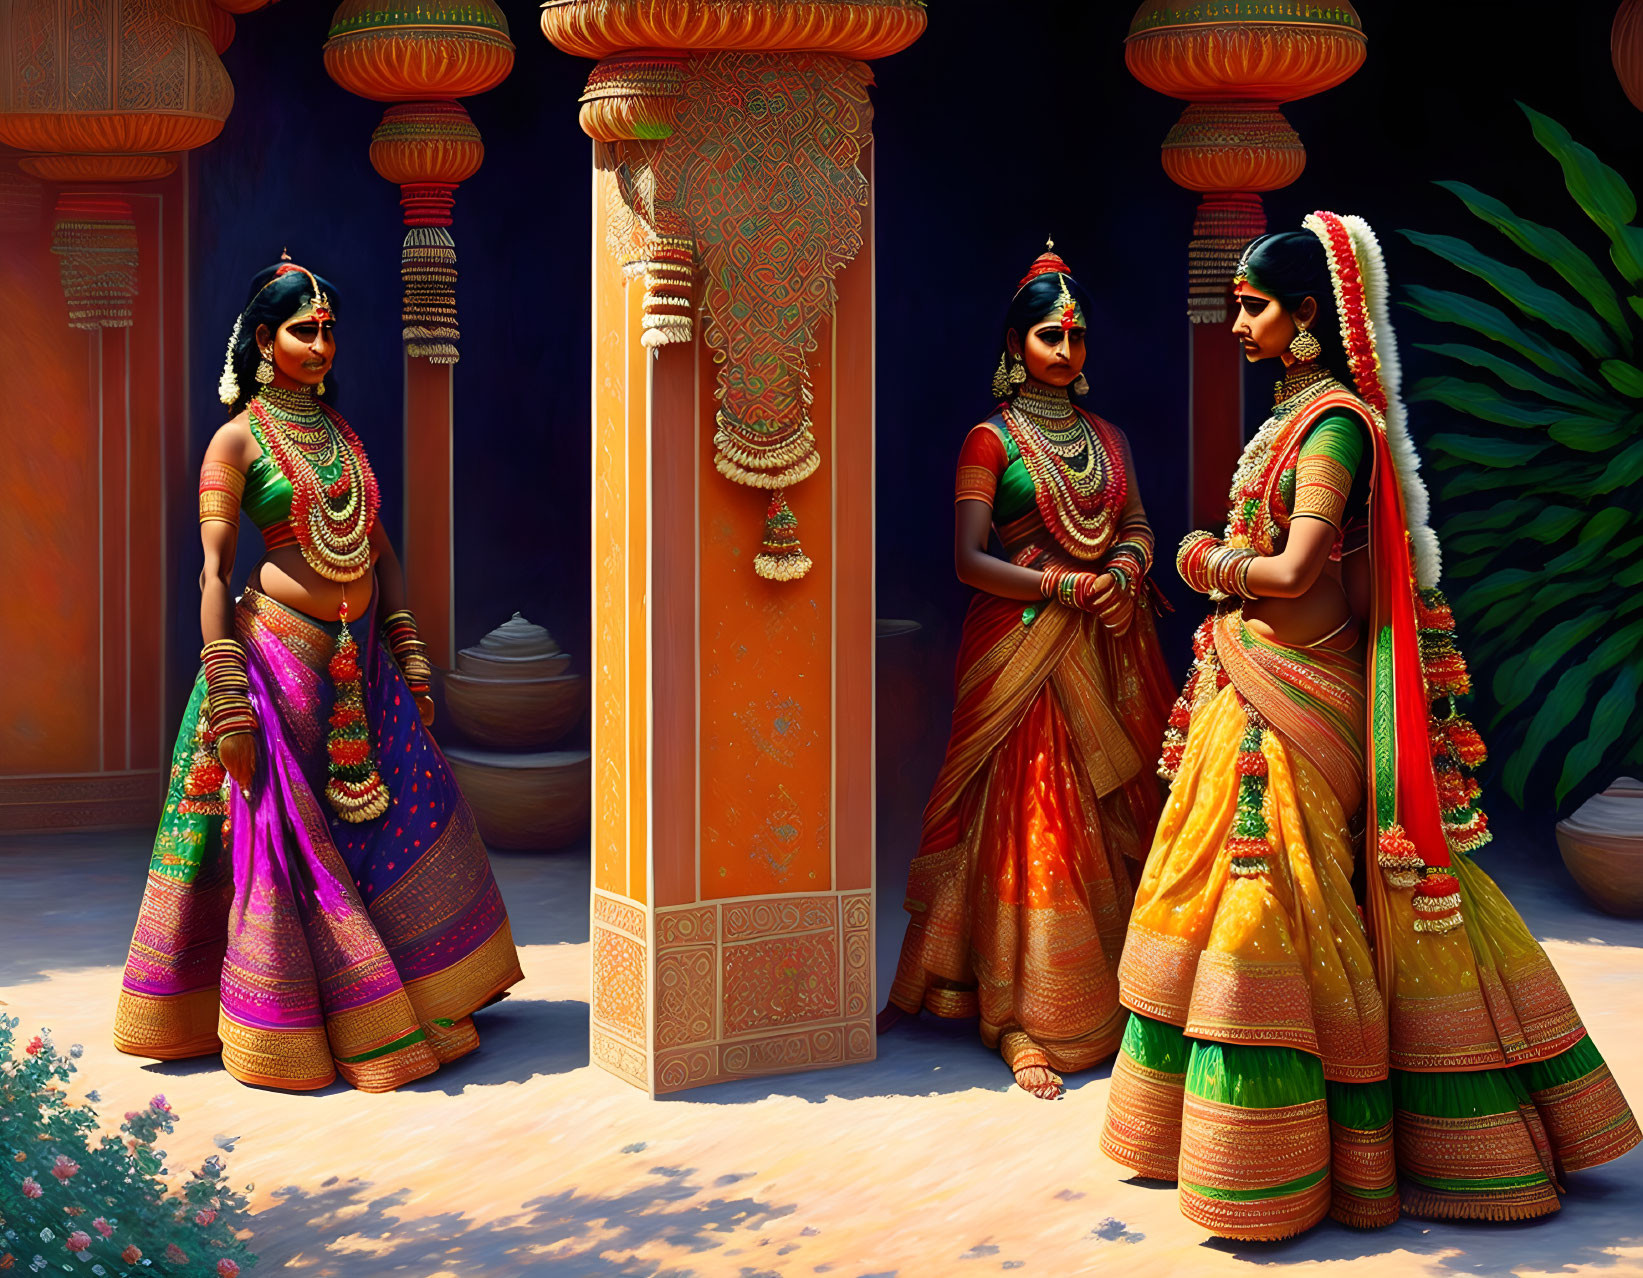 Traditional Indian Attire: Three Women Conversing in Ornate Courtyard